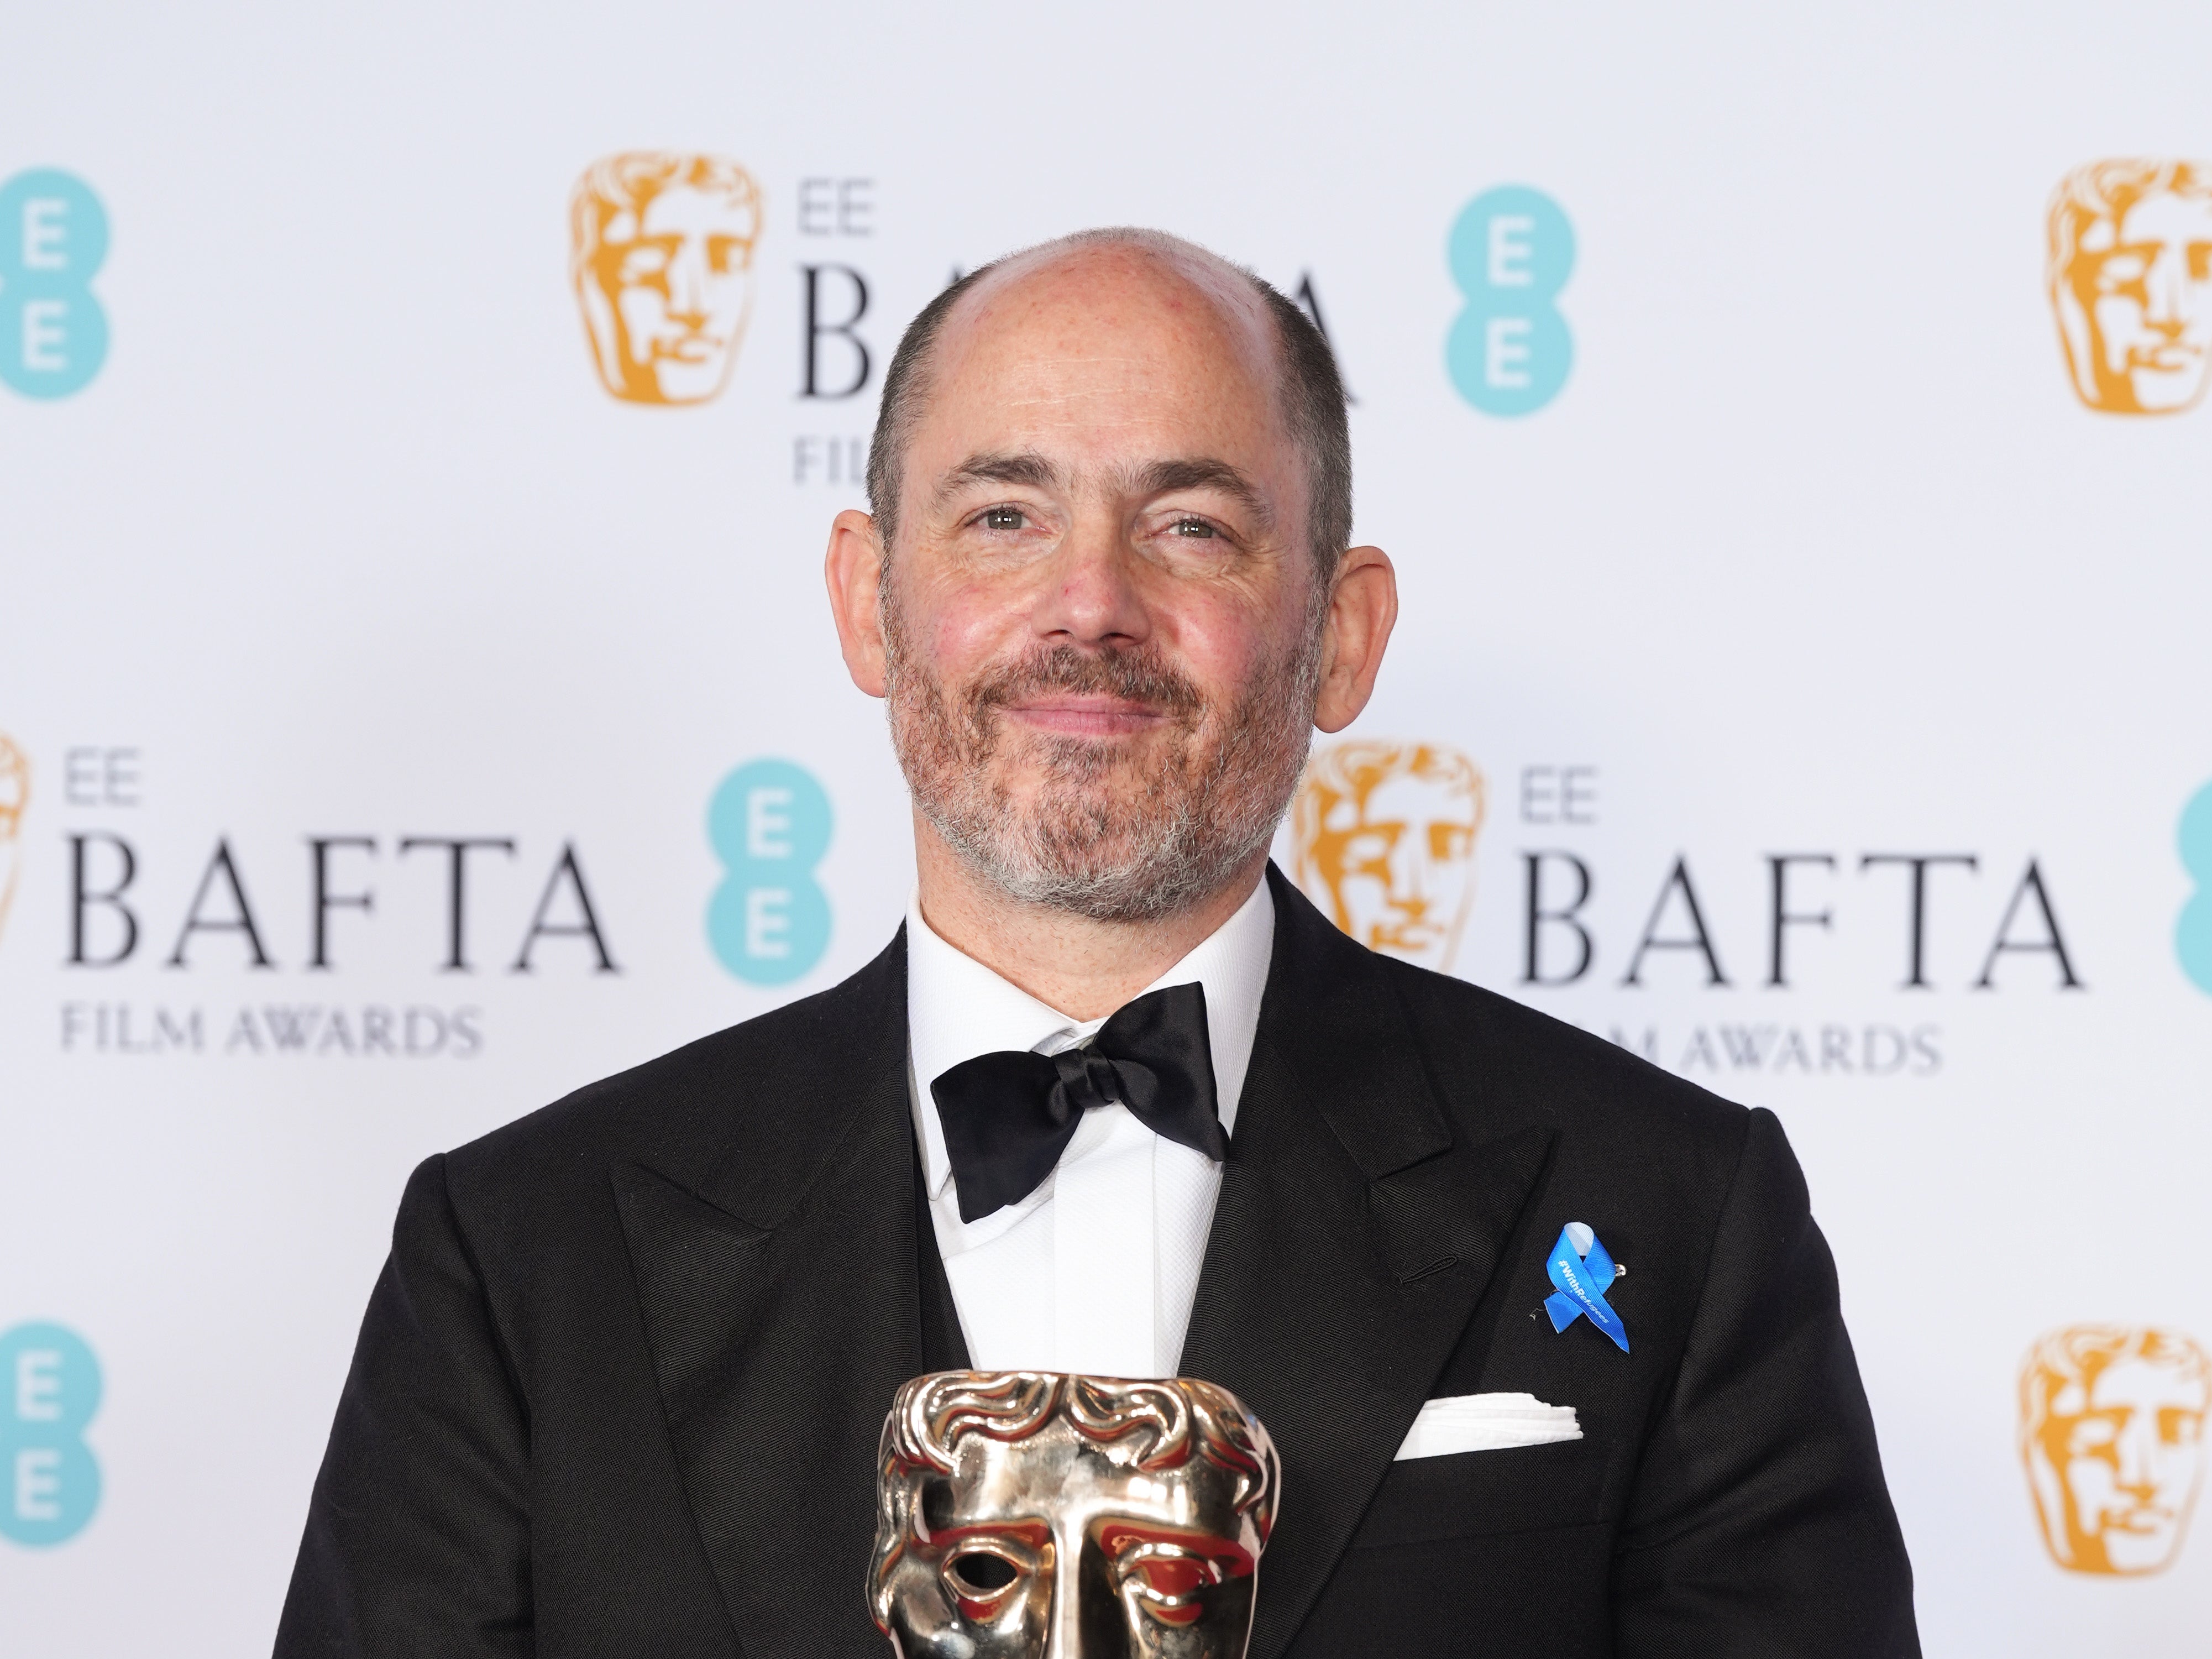 ‘All Quiet on the Western Front’ director Edward Berger at the Baftas